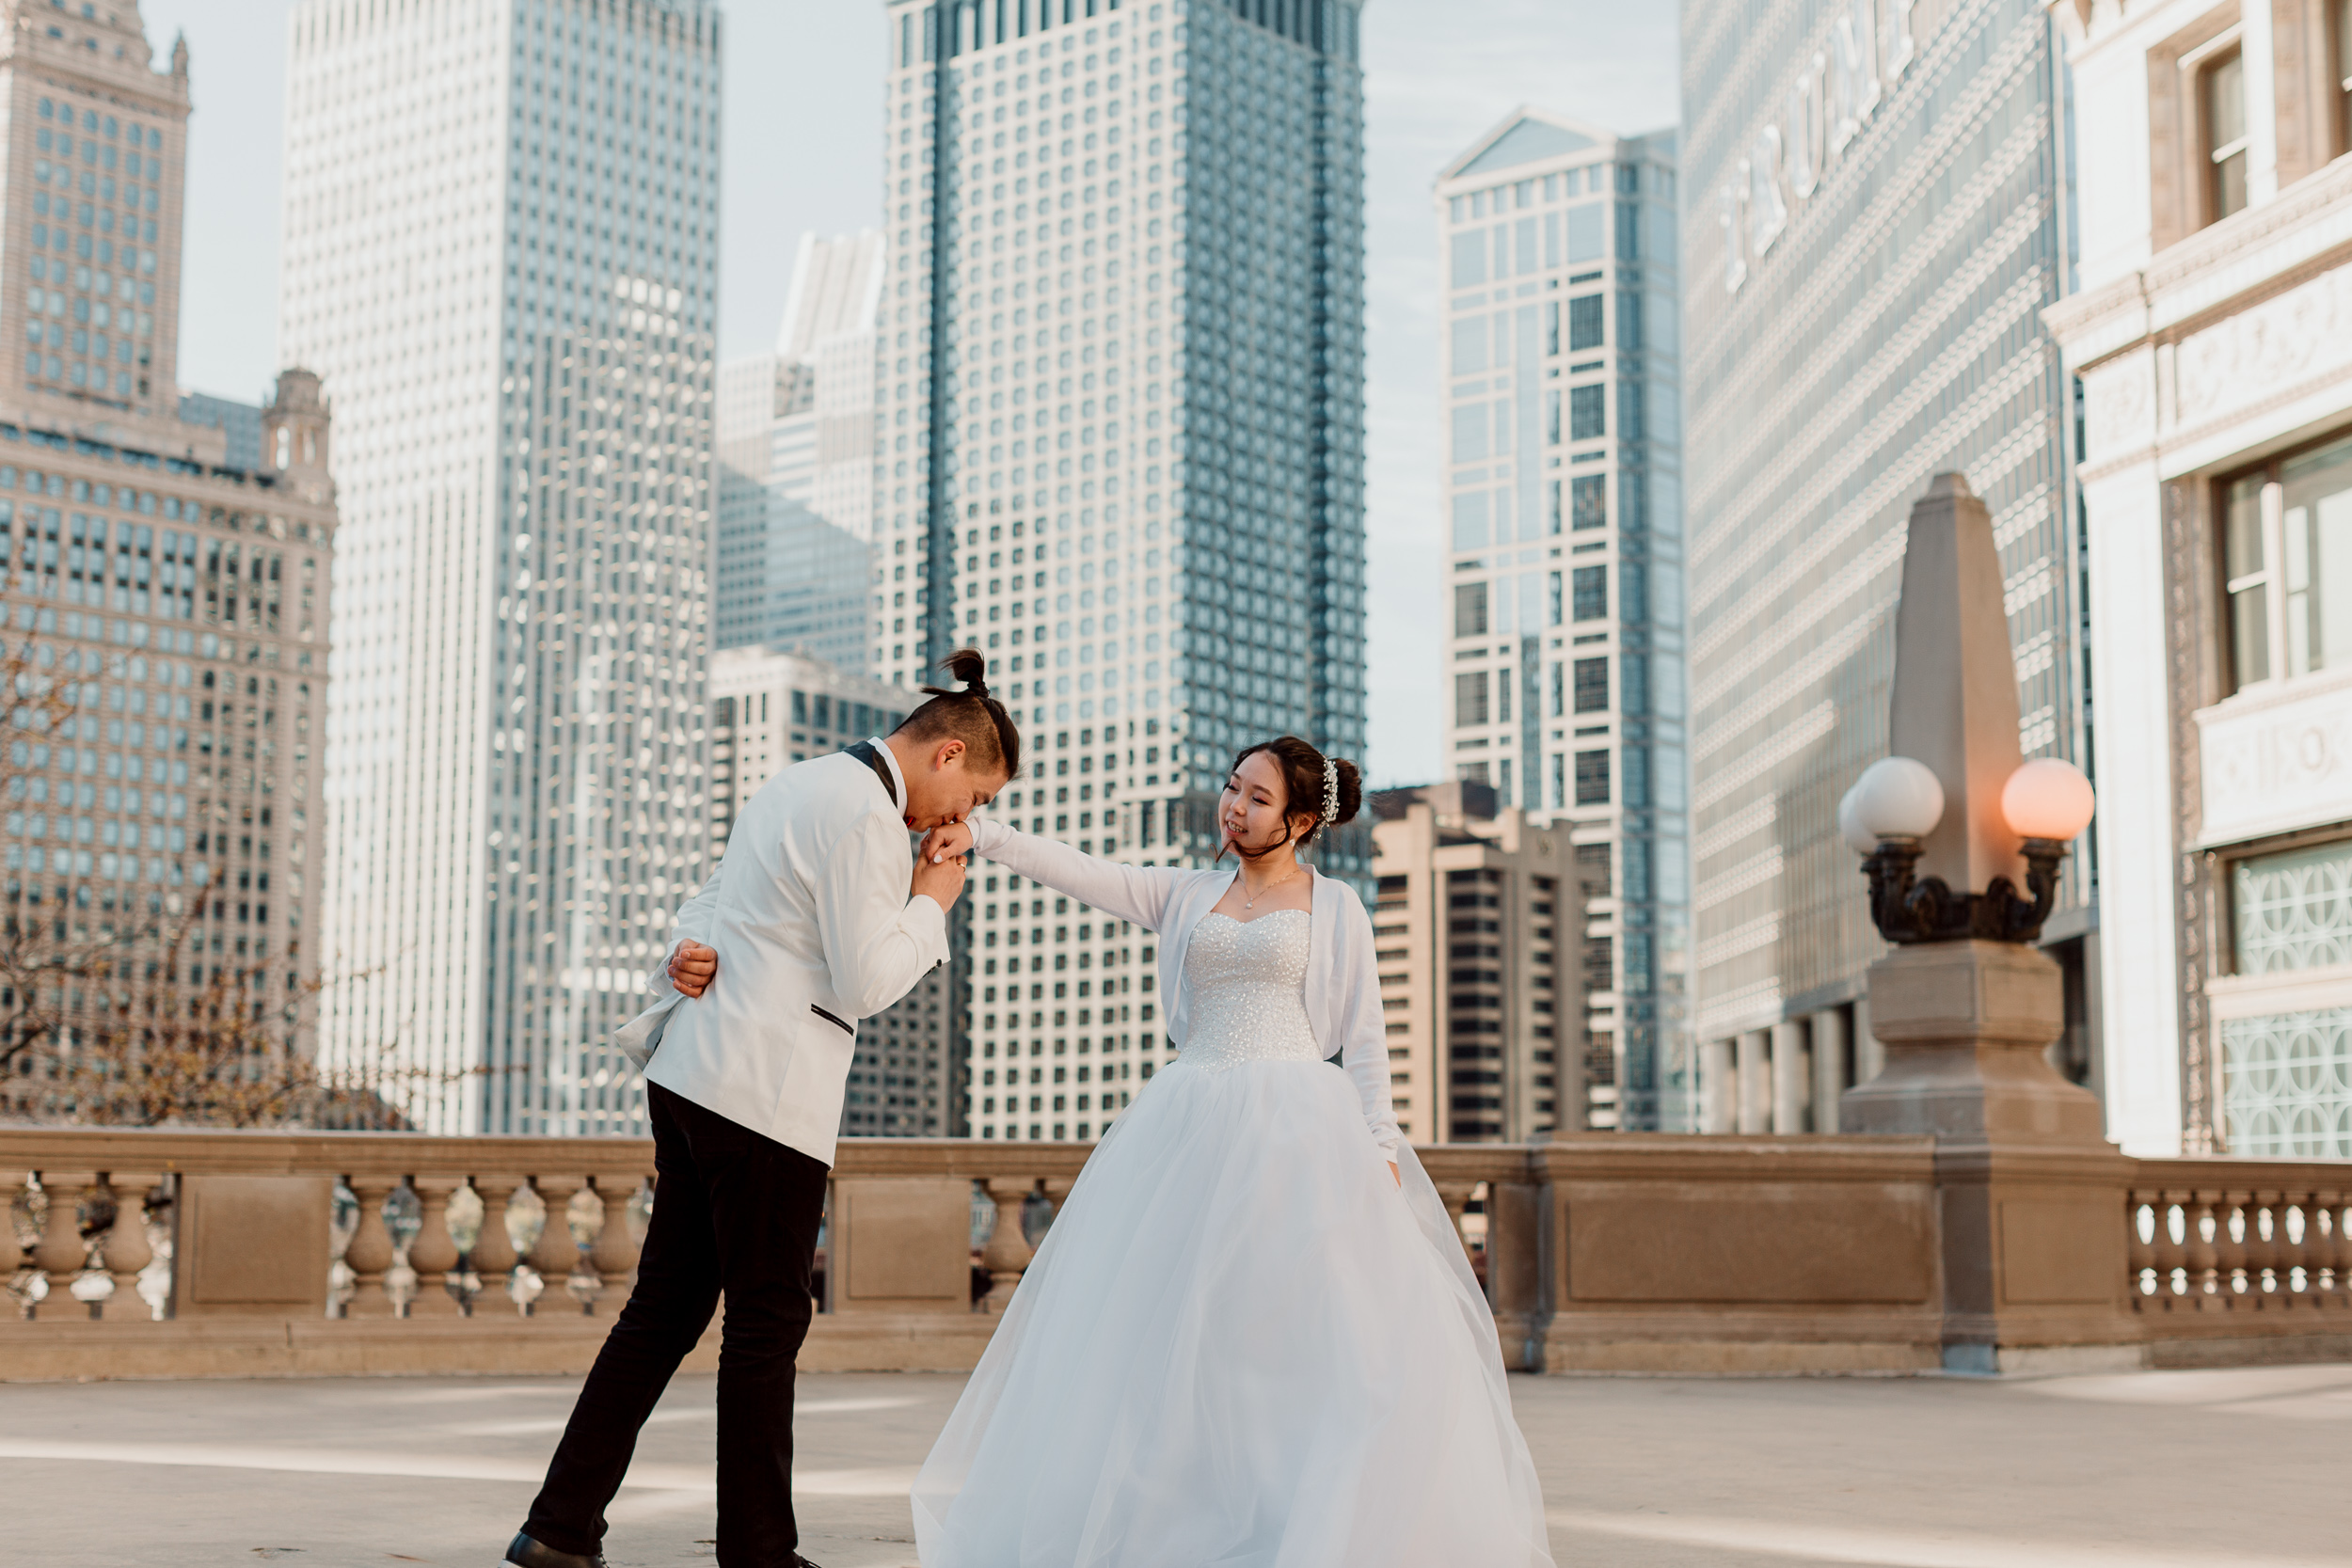 Chicago Skyline Bride and Groom Portraits | Chicago Locations for Photos | Downtown Chicago Wedding Photographer | Trump Tower Wedding | Trump Tower Elopement | Chicago Elopement | Small Chicago Wedding | Courthouse Wedding Chicago | Chicago Wedding Photographer | Chicago Elopement Photographer | Small Wedding Photographer Chicago